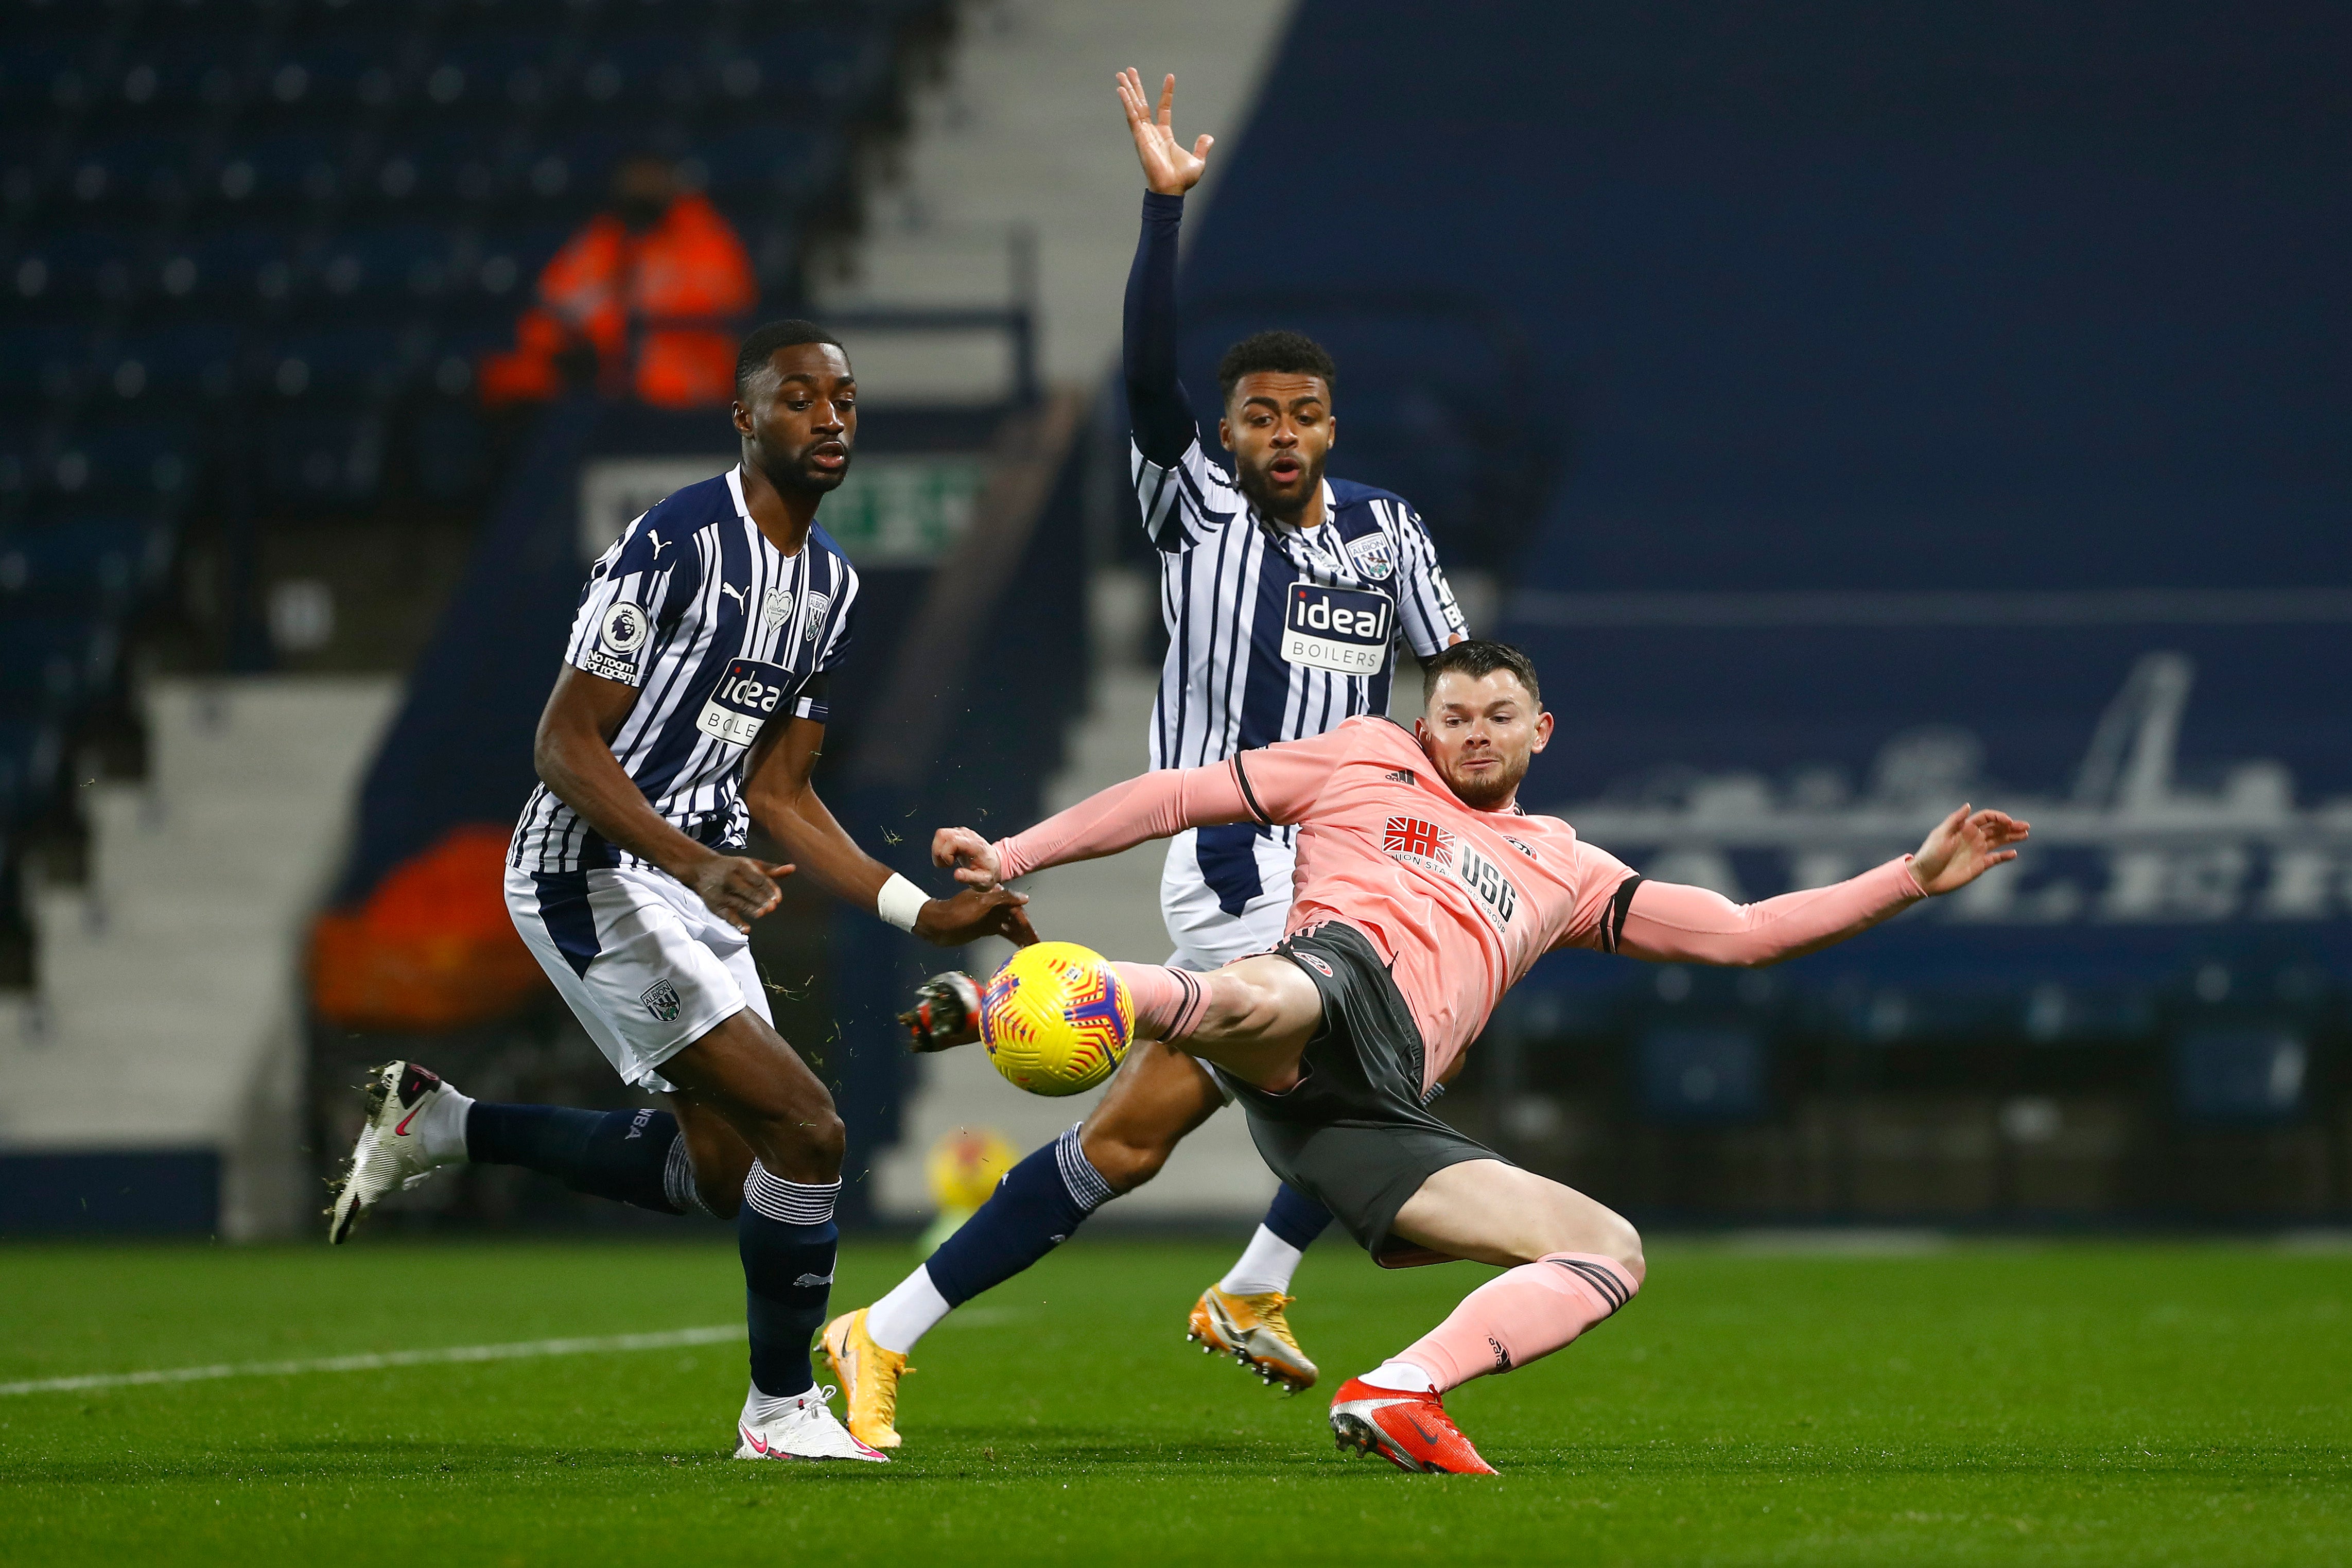 West Brom and Sheffield United meet in a relegation ‘six-pointer’